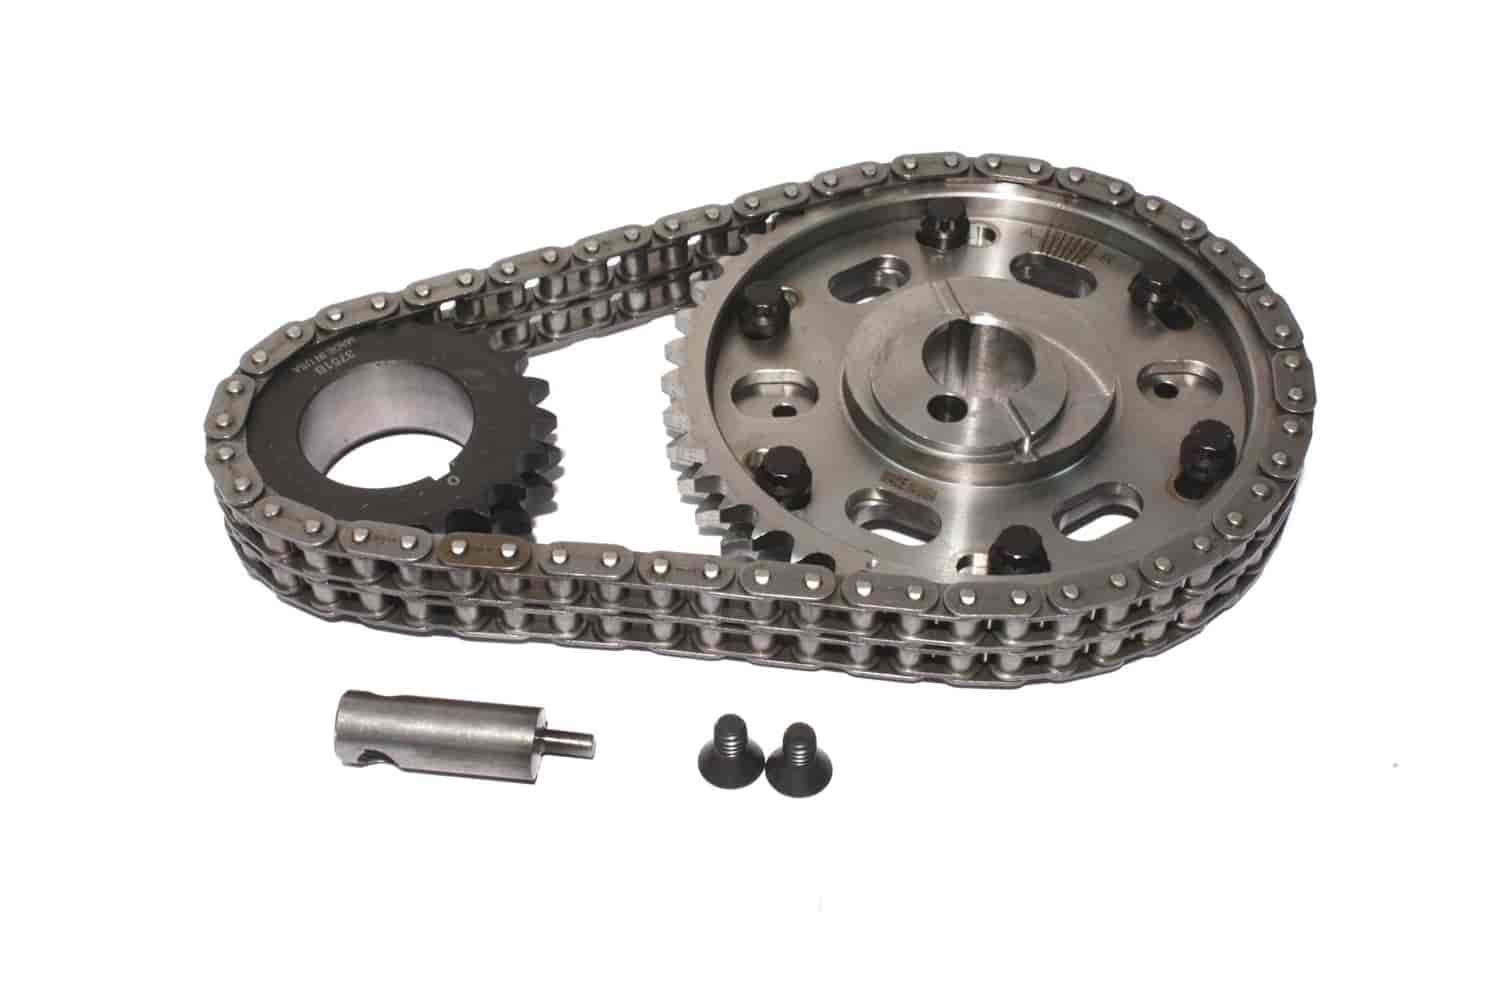 LT195-UP,HIGH ENERGY, COMP Cams 3307 Timing Chain 